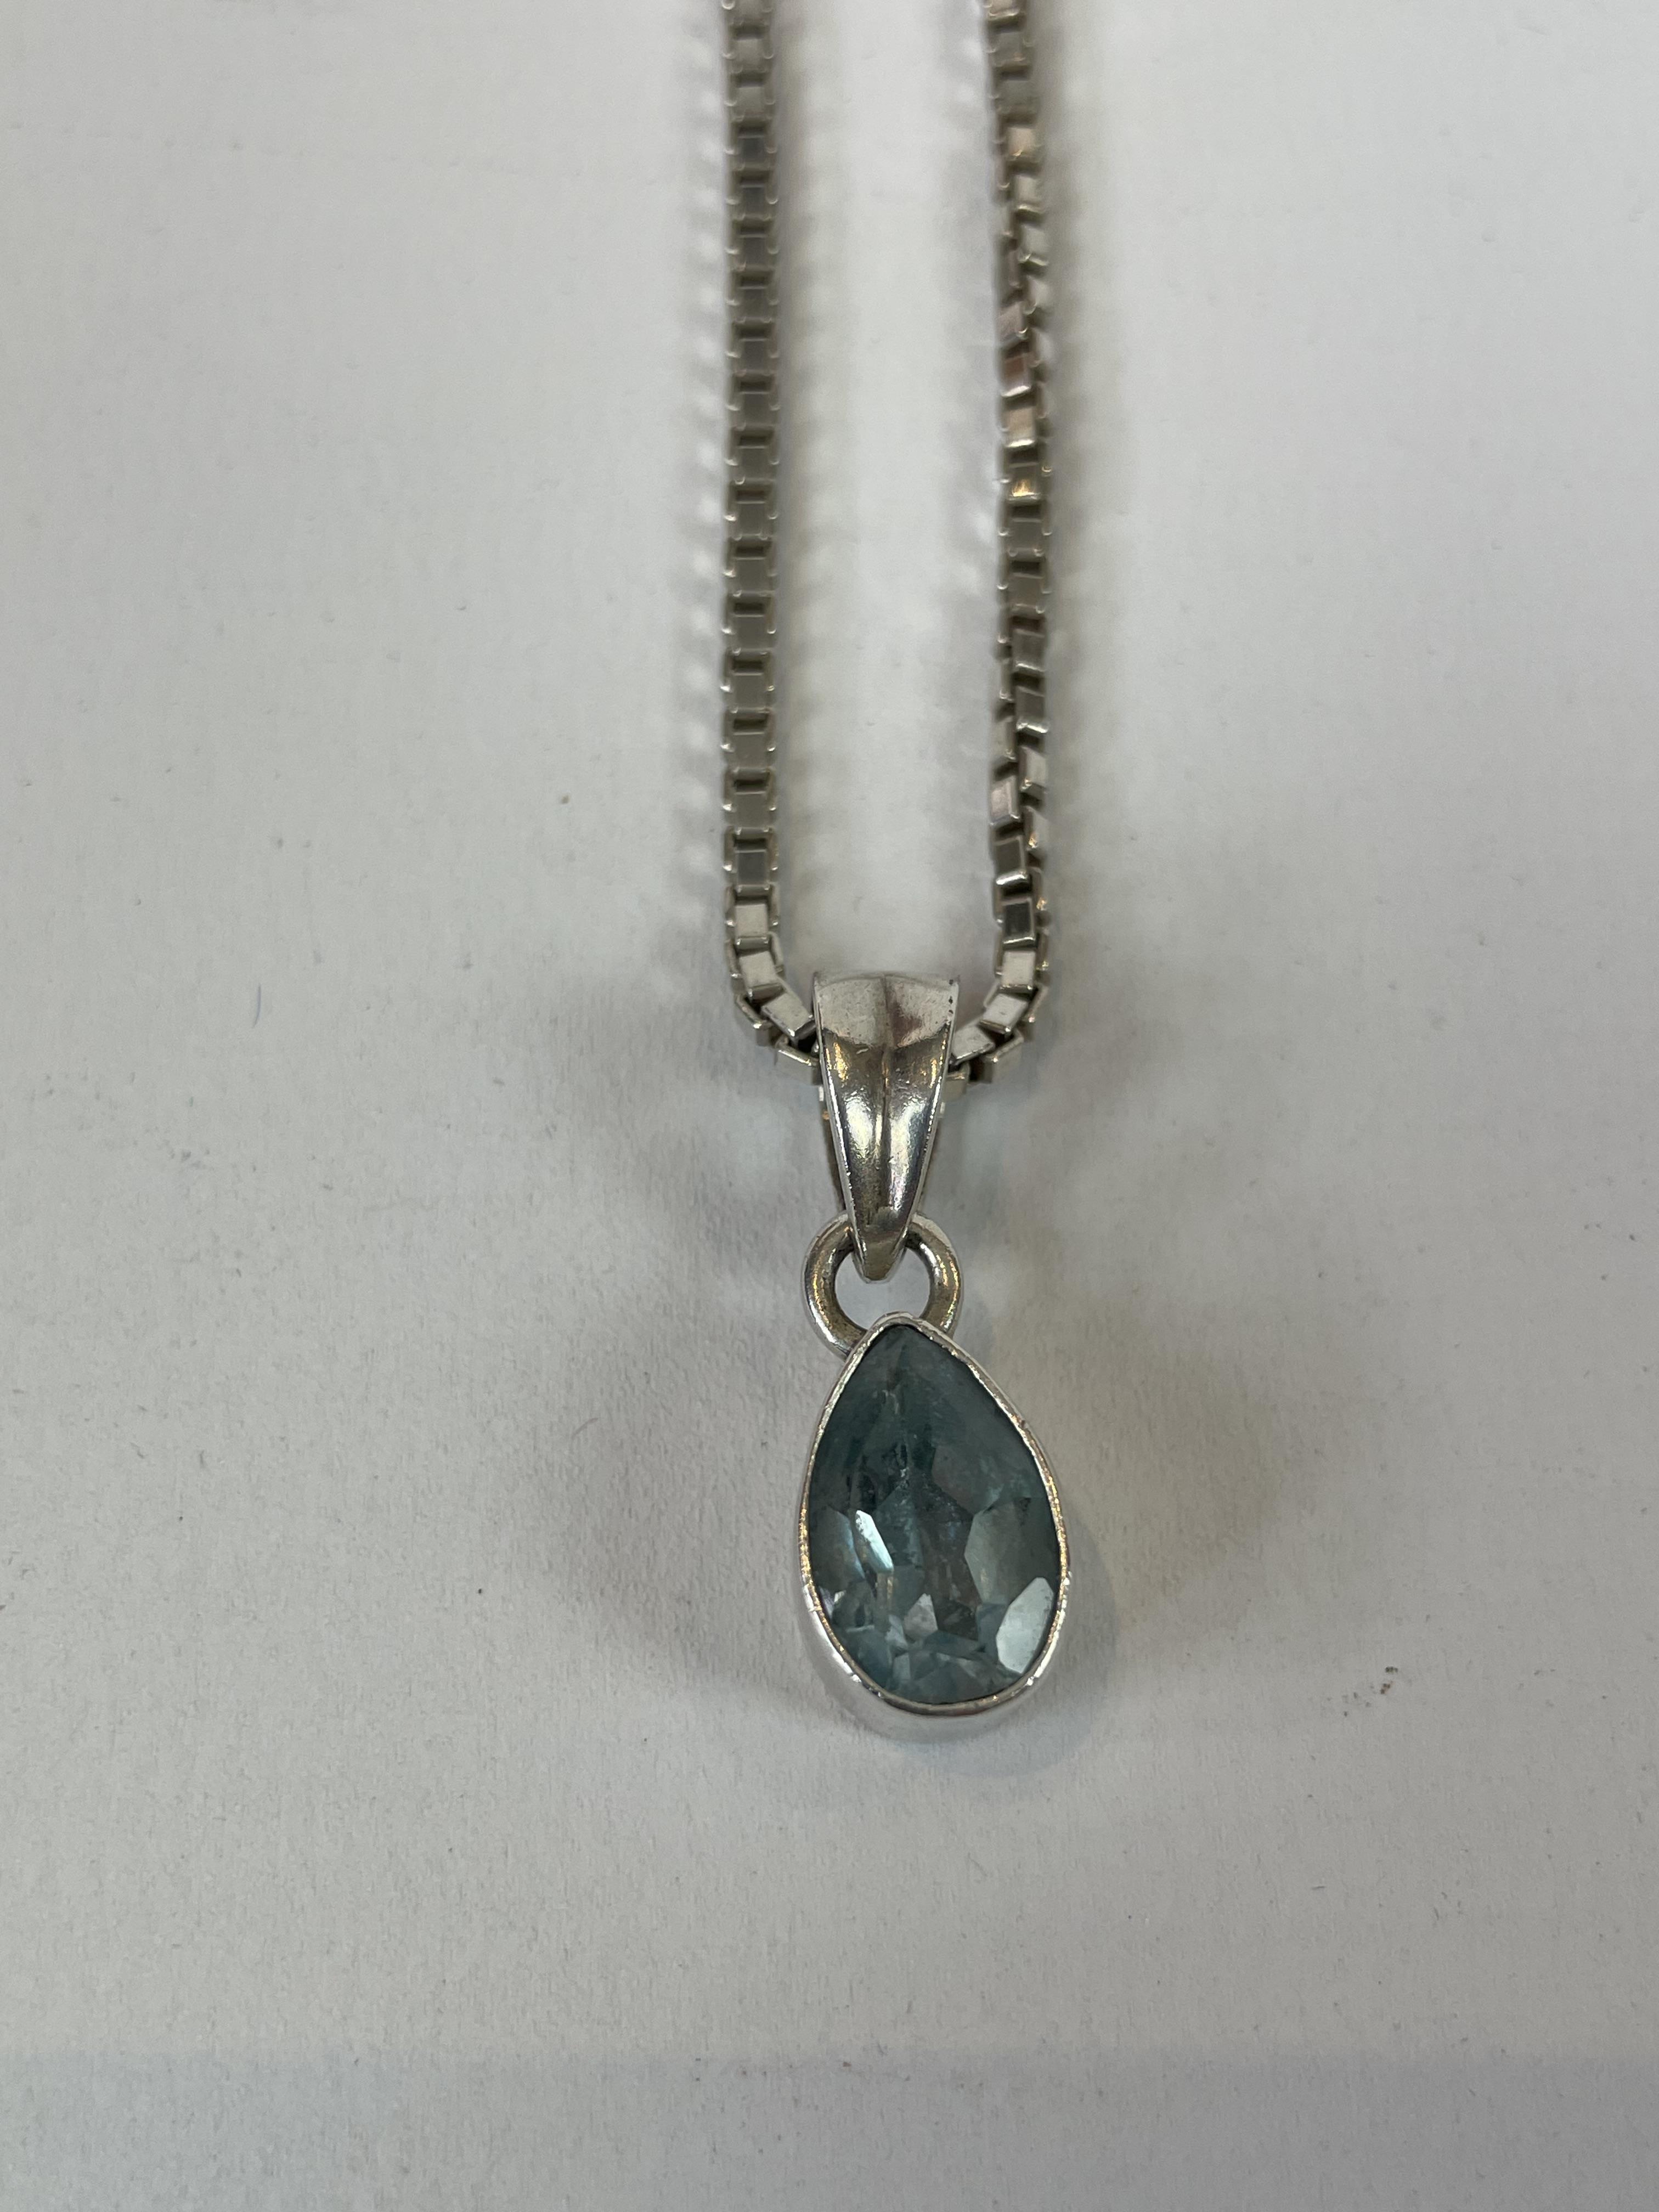 heavy silver chain necklace with pendant in silver casing - Image 2 of 2